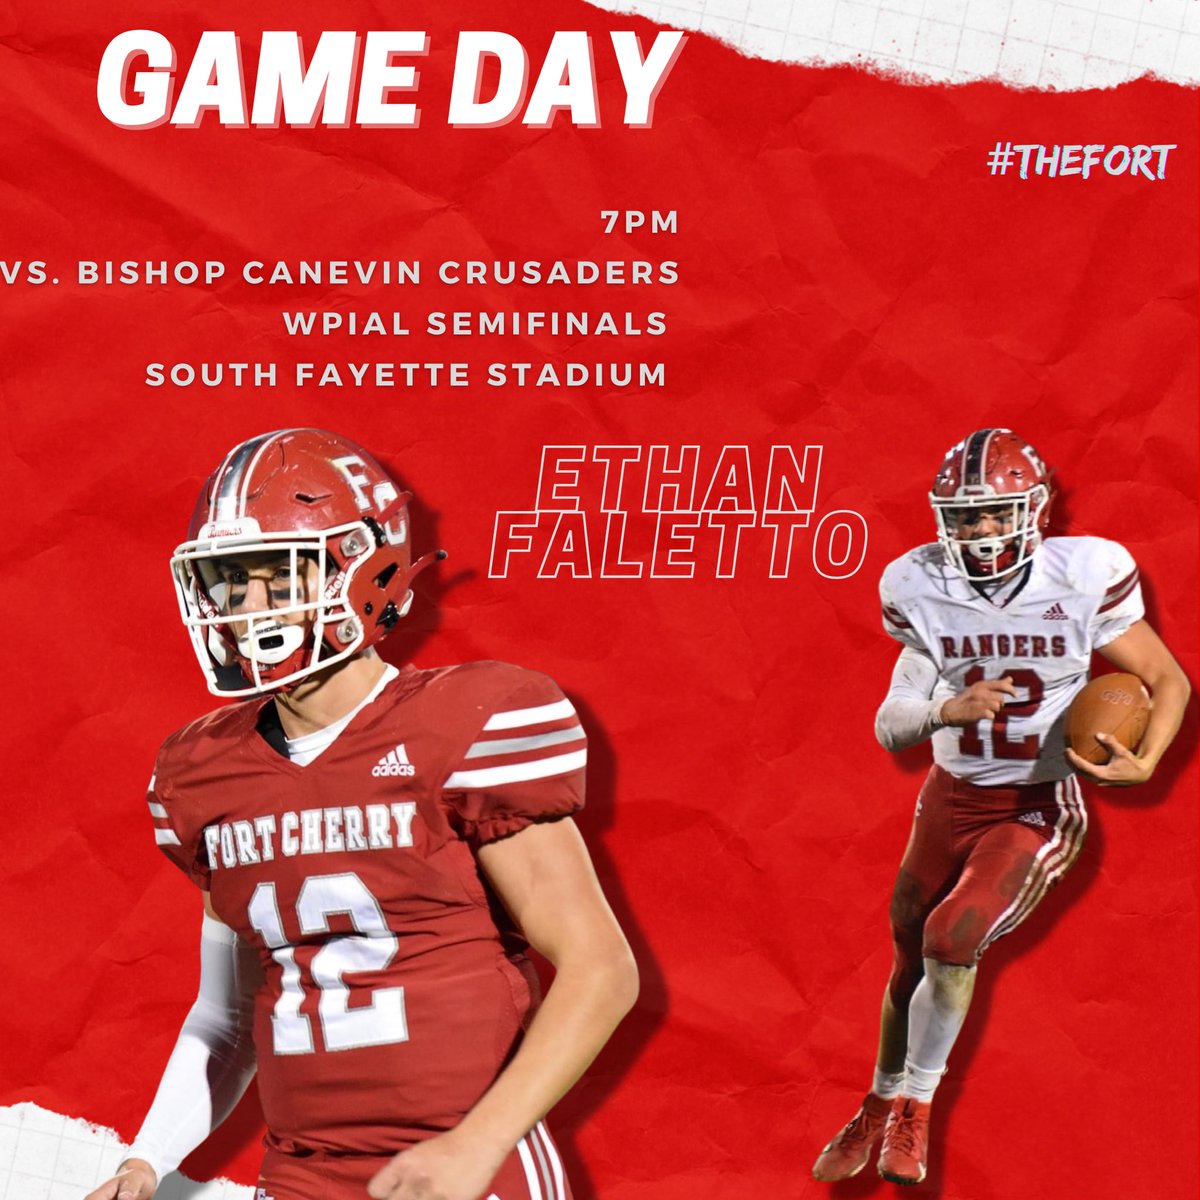 Game day! #TheFort